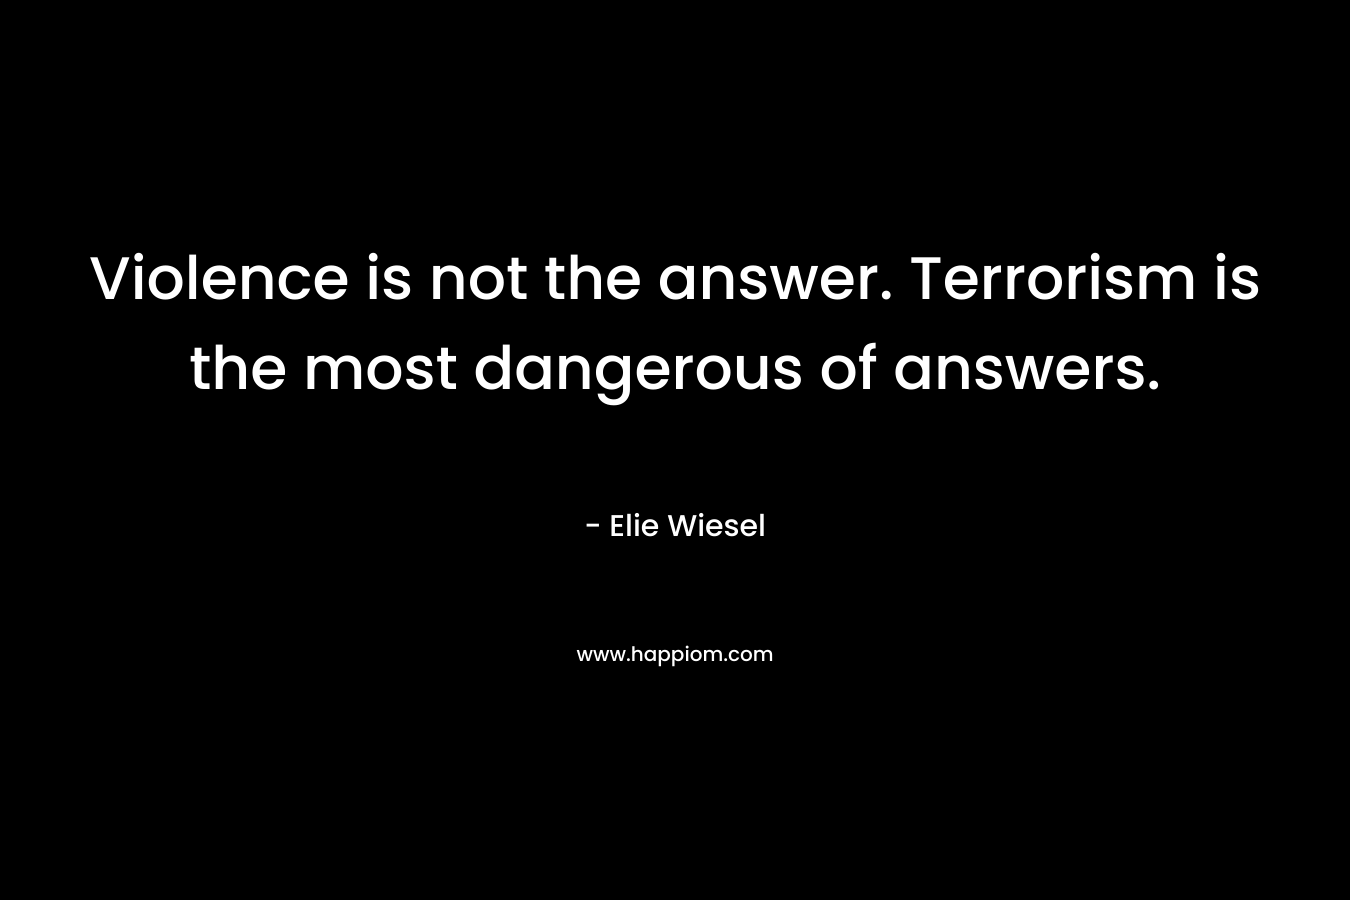 Violence is not the answer. Terrorism is the most dangerous of answers.